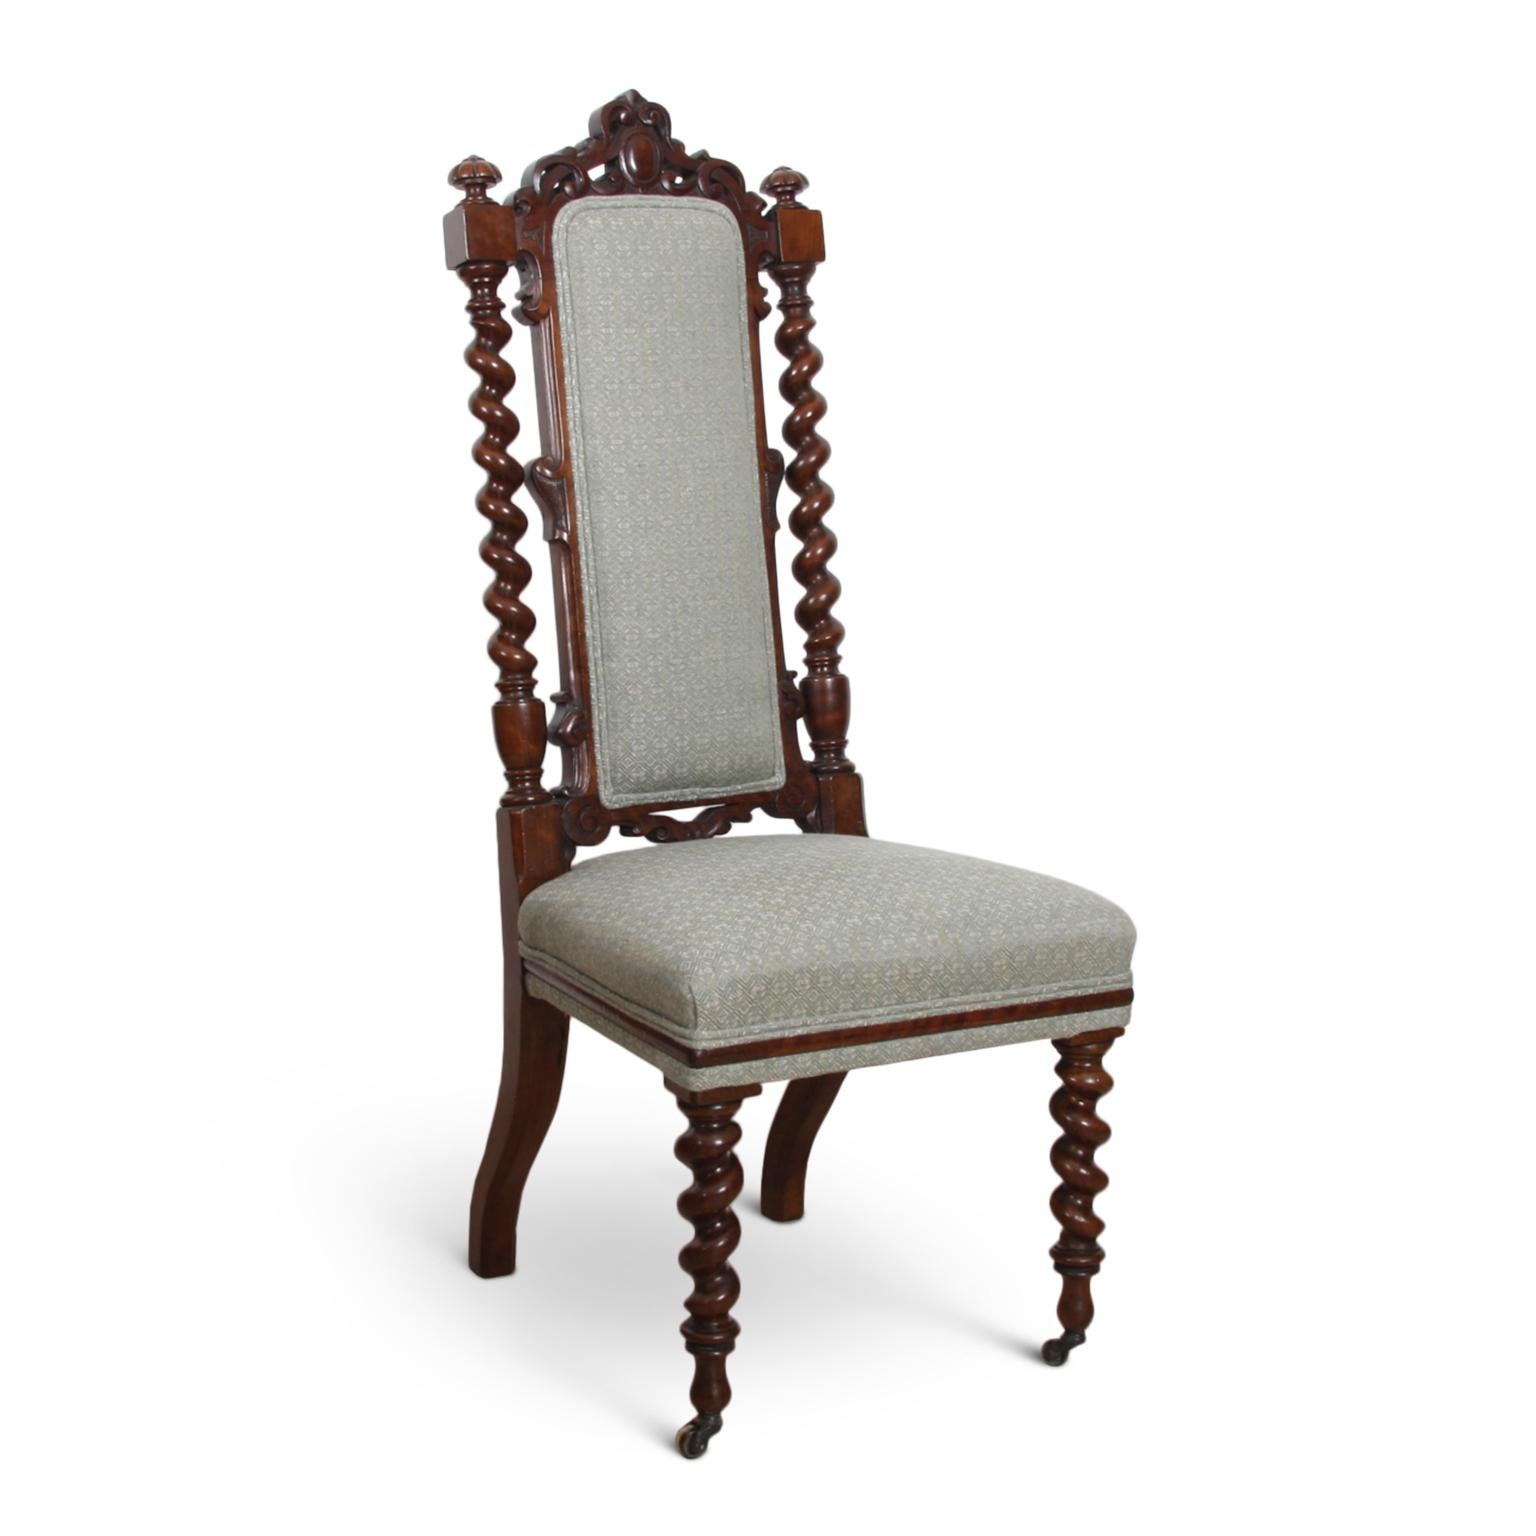 A fantastic hall chair by Lamb of Manchester with mahogany barley twist legs and reupholstered Mark Alexander linen. This chair dates back to Victorian England and retains the original maker's stamp.